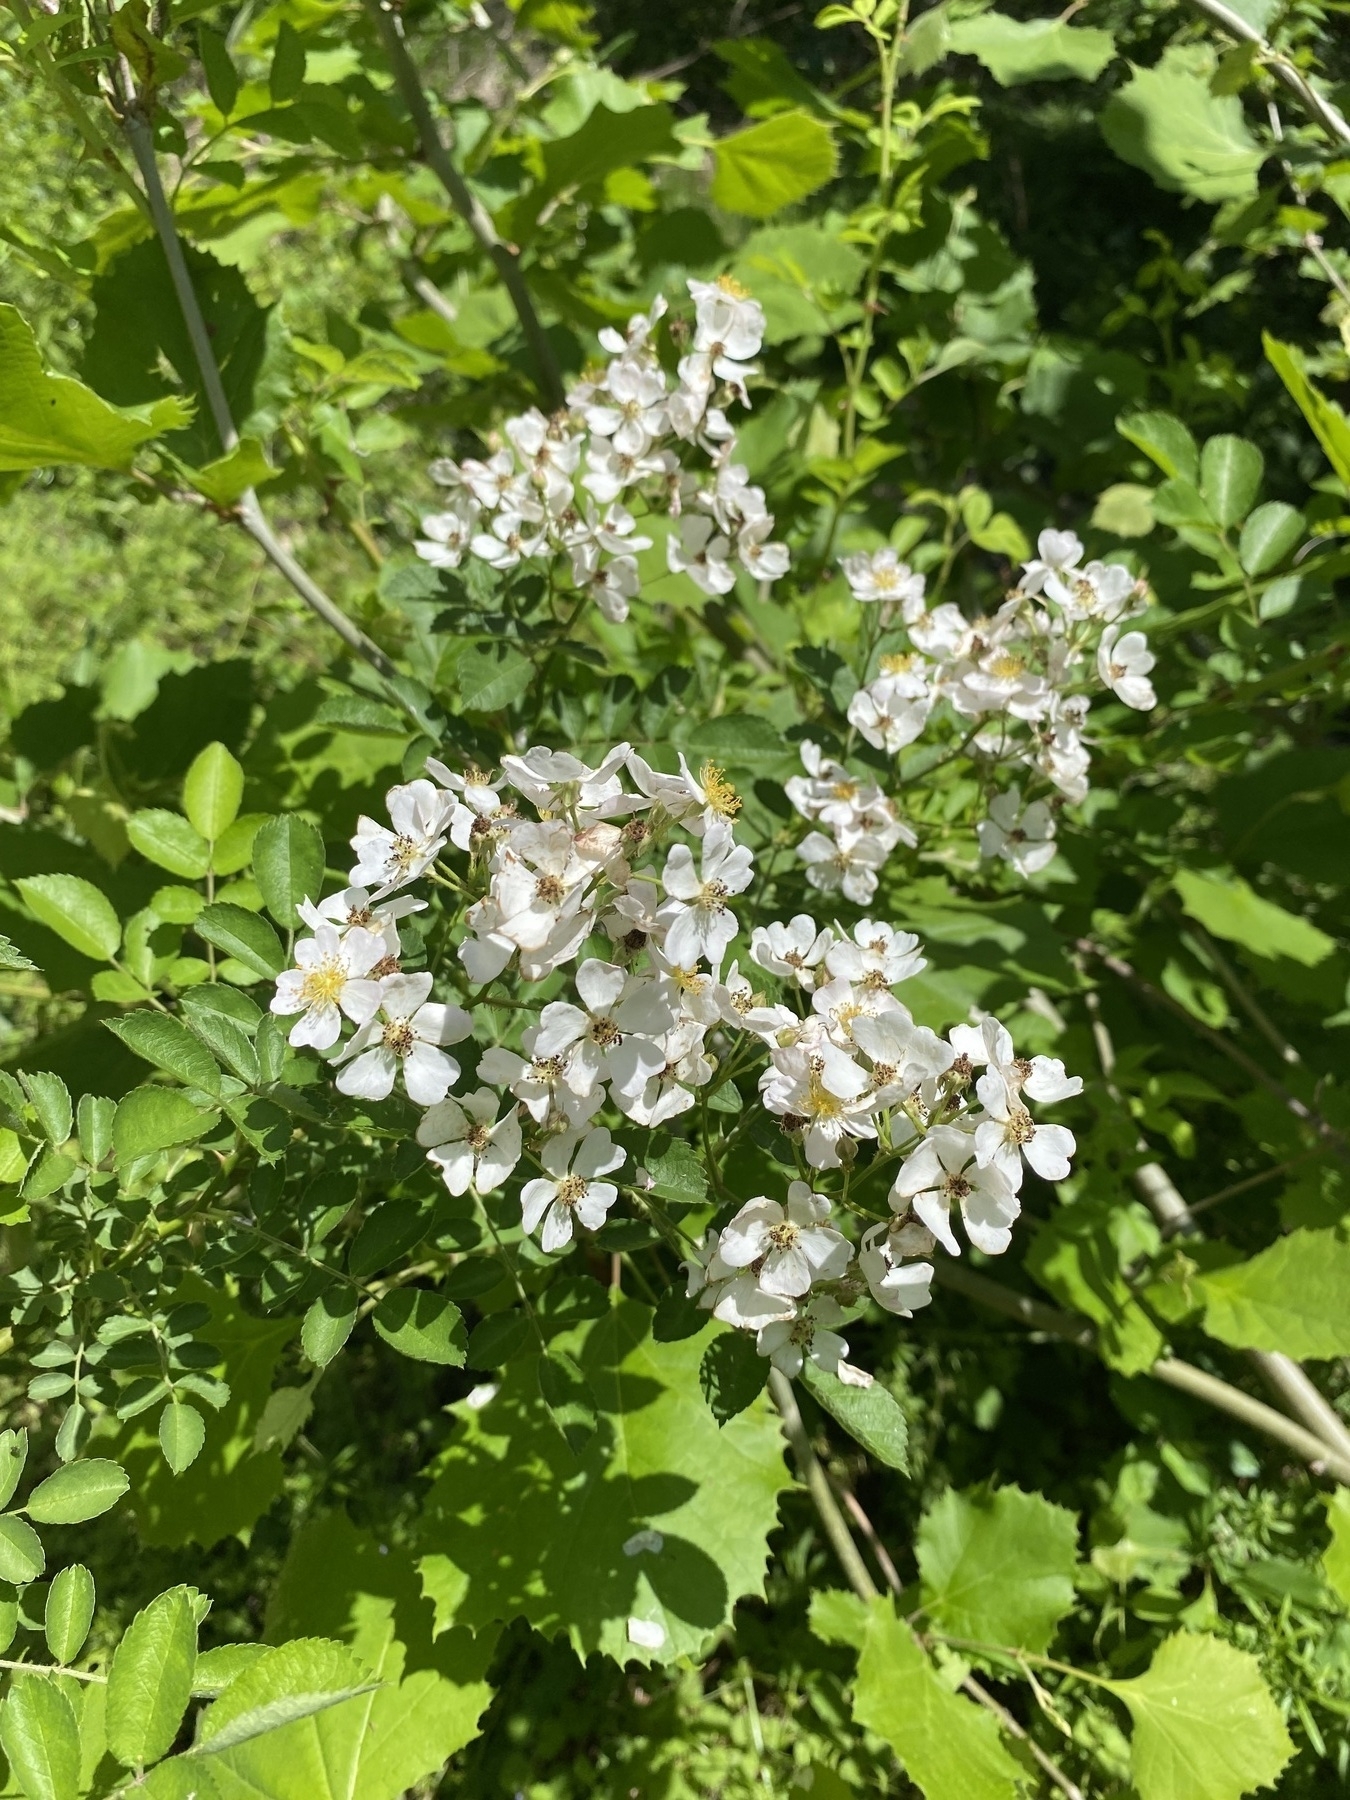 A picture of a wild rose (I think it’s a type of rose) with clumps of tiny white flowers.